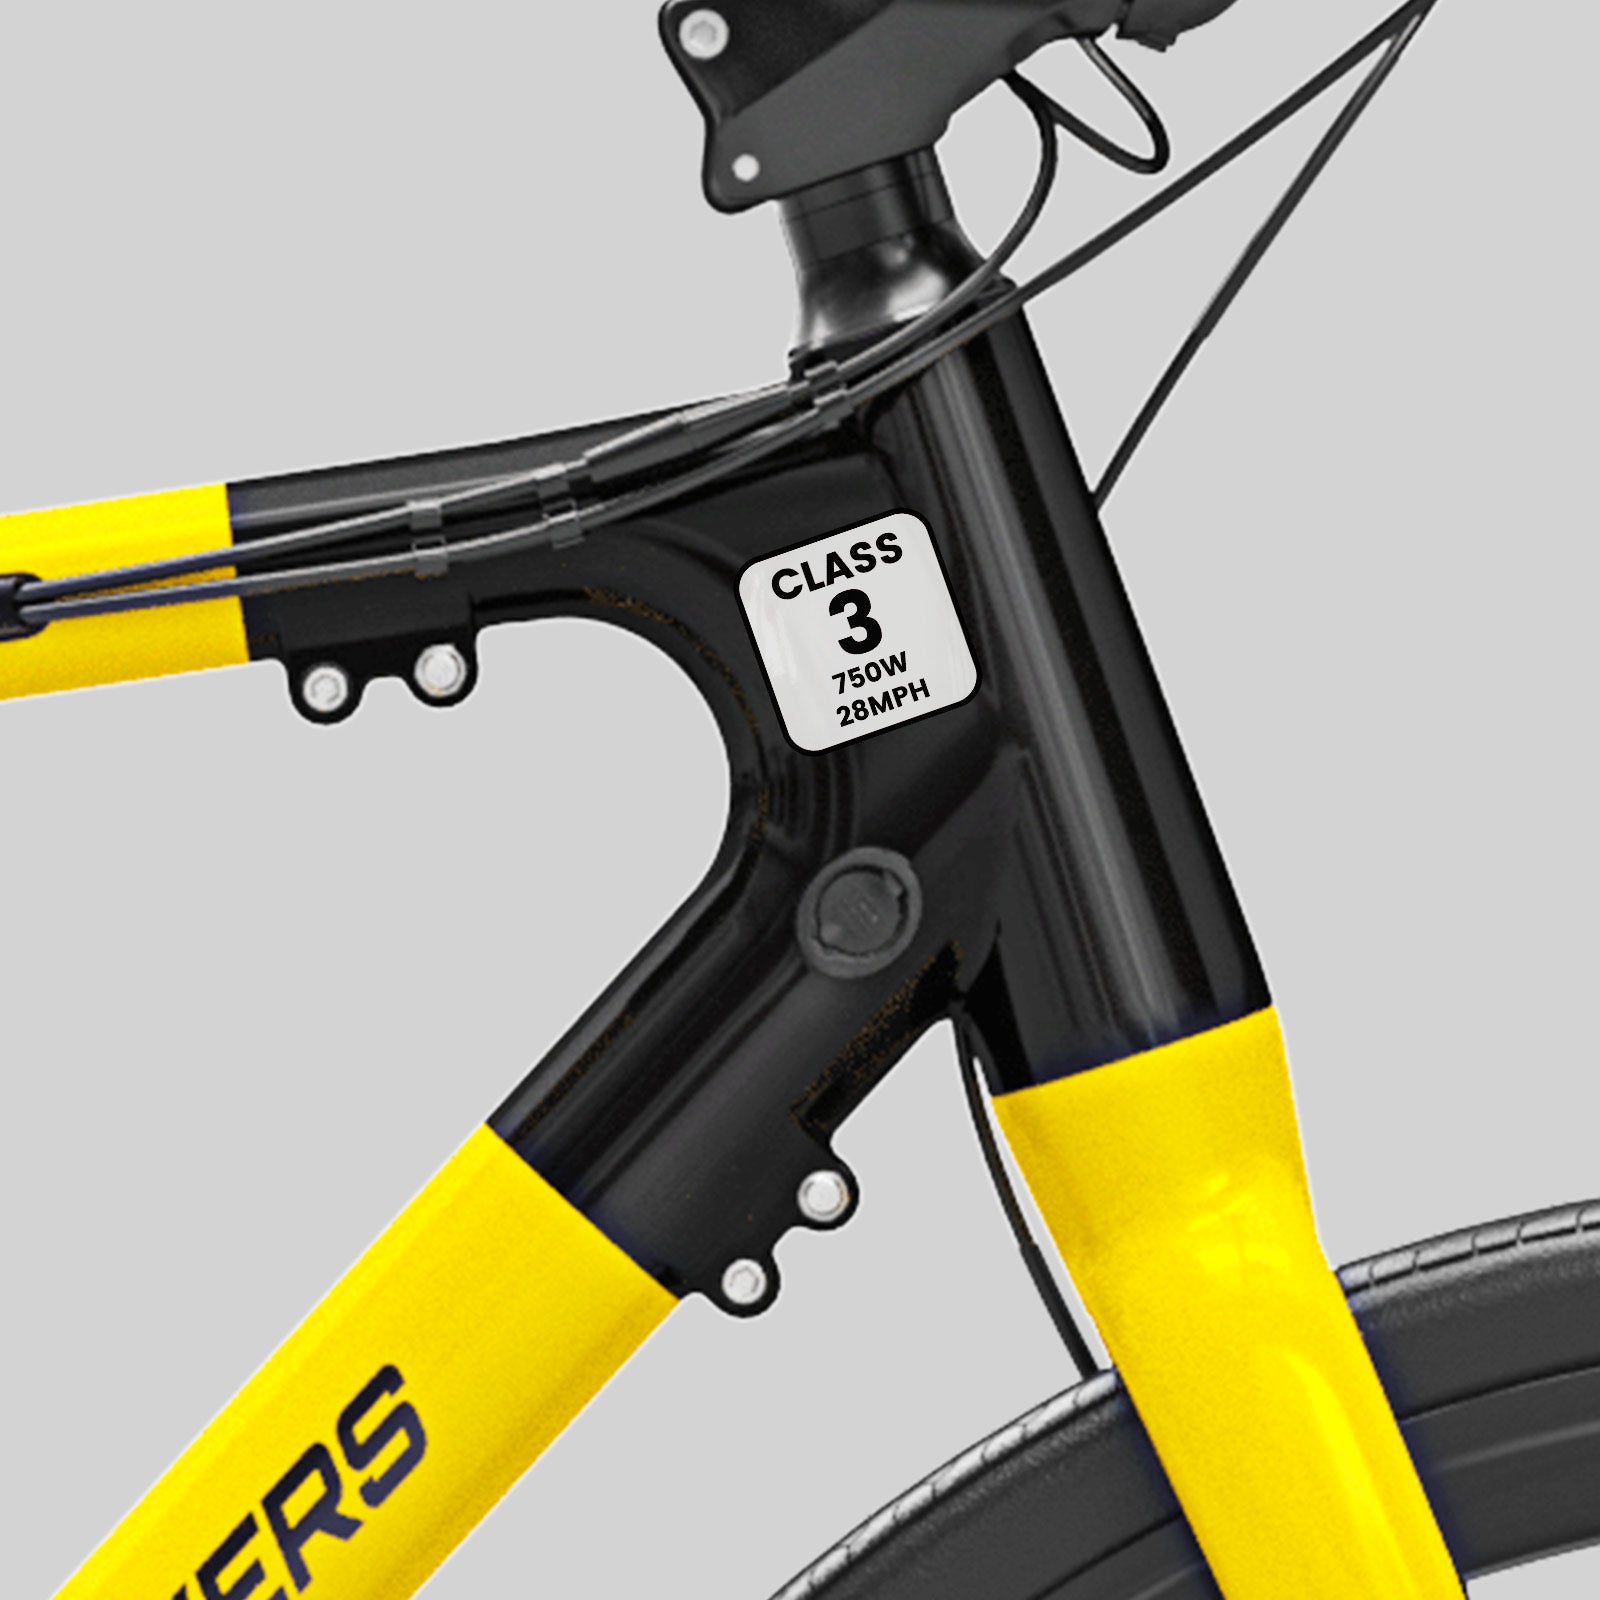 All e-bikes in California must have a 1.5 x 1.5 inch vinyl label detailing the type, top assisted speed, and motor wattage. Class 1 e-bikes are pedal-assist only, with no throttle, and have a maximum assisted speed of 20 mph. Class 2 e-bikes are throttle-assisted with a maximum speed of 20 mph. Class 3 e-bikes are pedal-assist only, with no throttle, and have a maximum assisted speed of 28 mph.